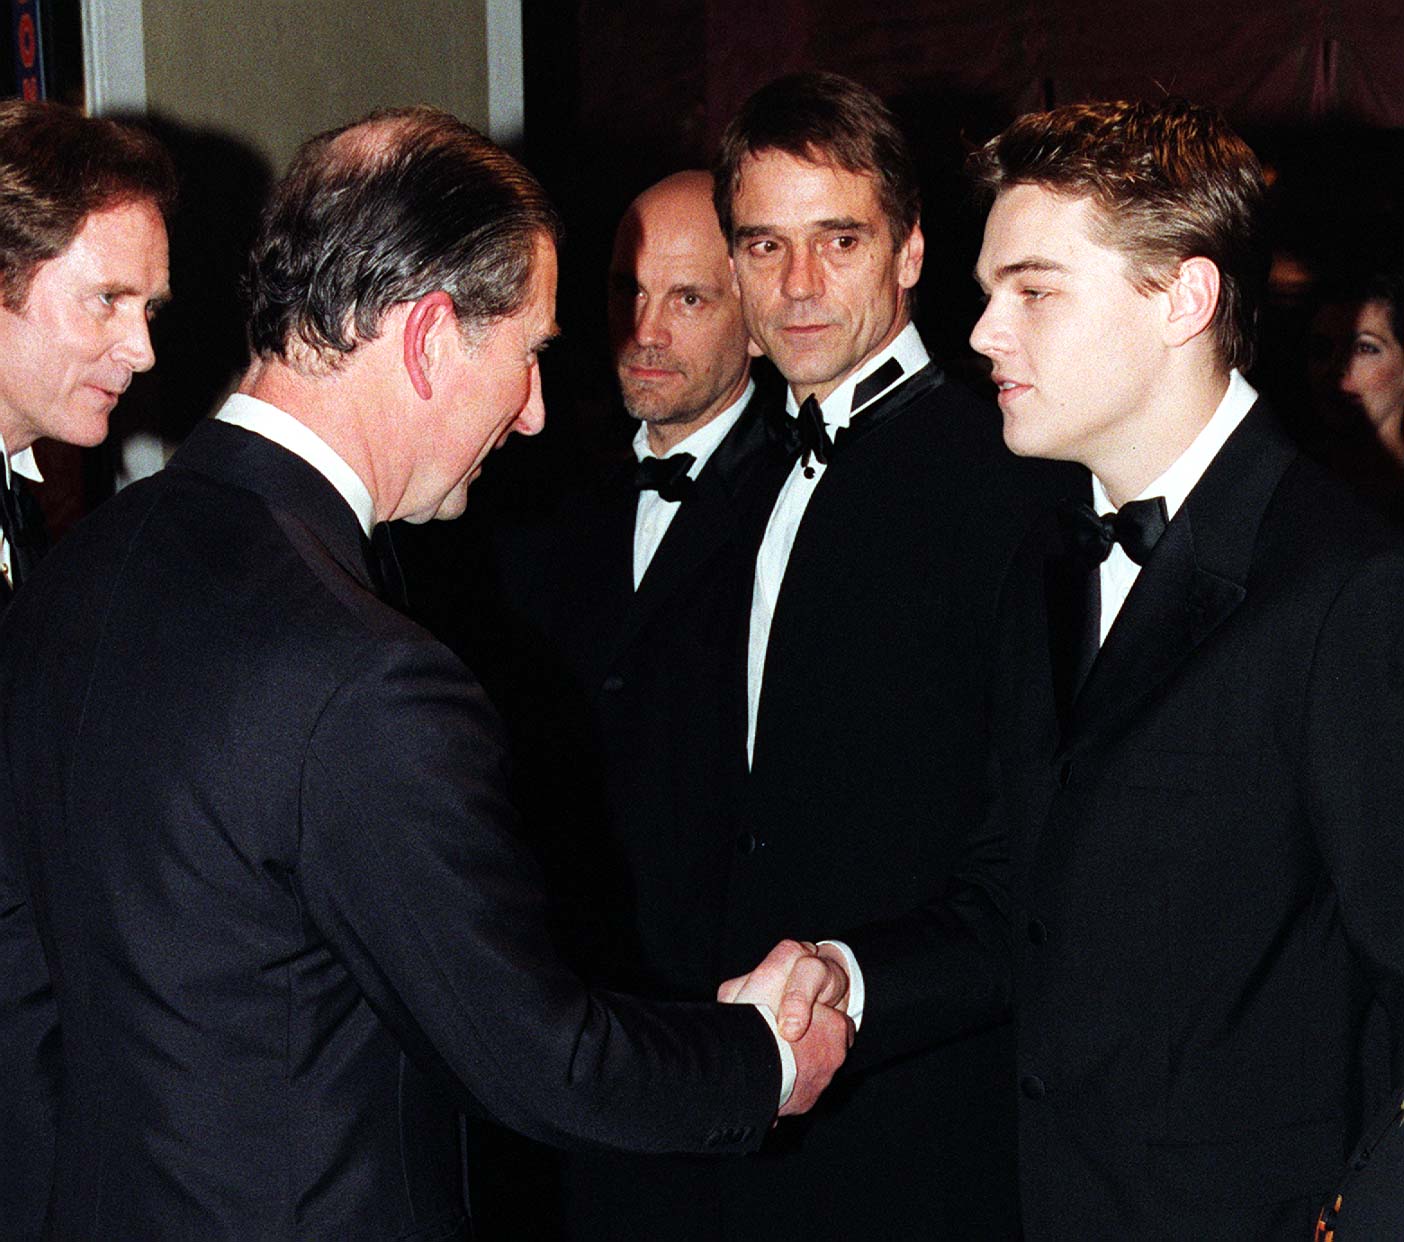 Charles Prince of Wales (now King Charles III) shakes hands with Leonardo DiCaprio at the Royal premiere of "The Man in the Iron Mask" on March 19, 1998 | Source: Getty Images